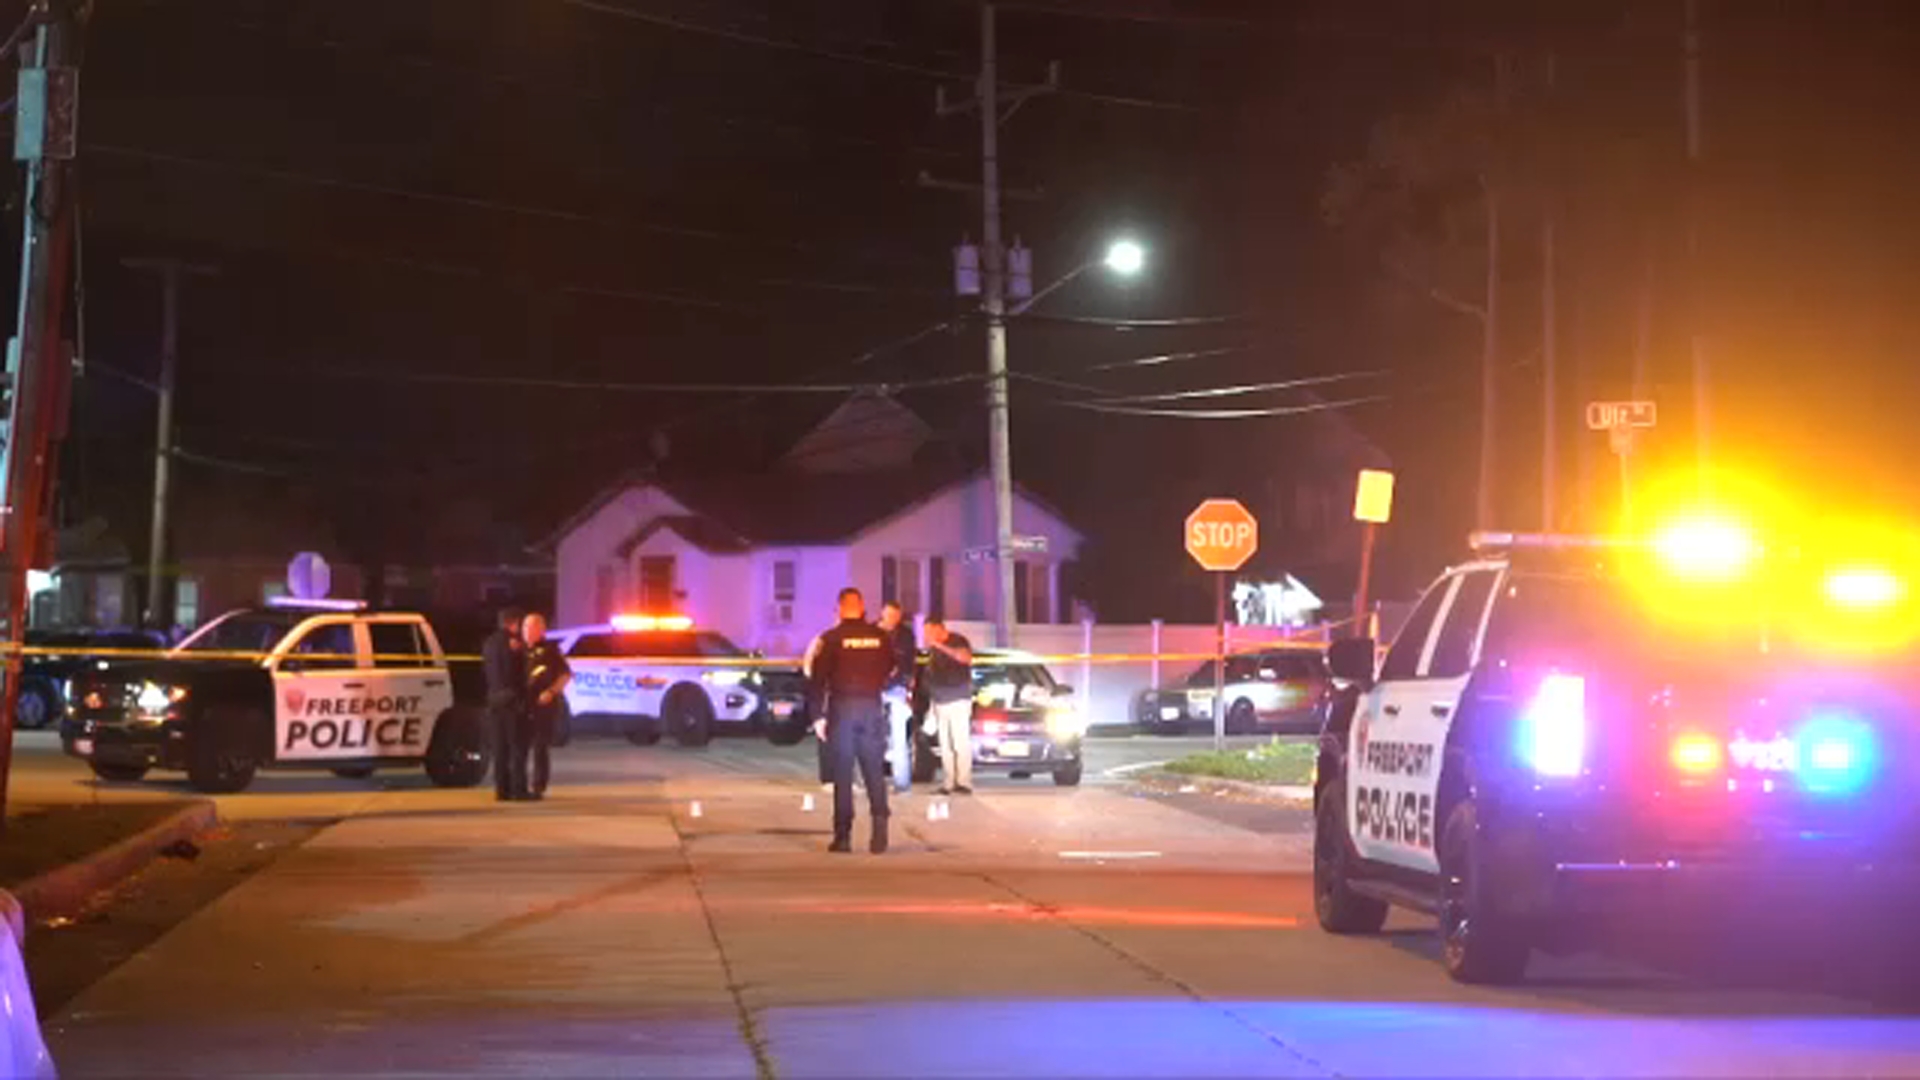 4 teens wounded in drive-by shooting outside house party in Nassau County